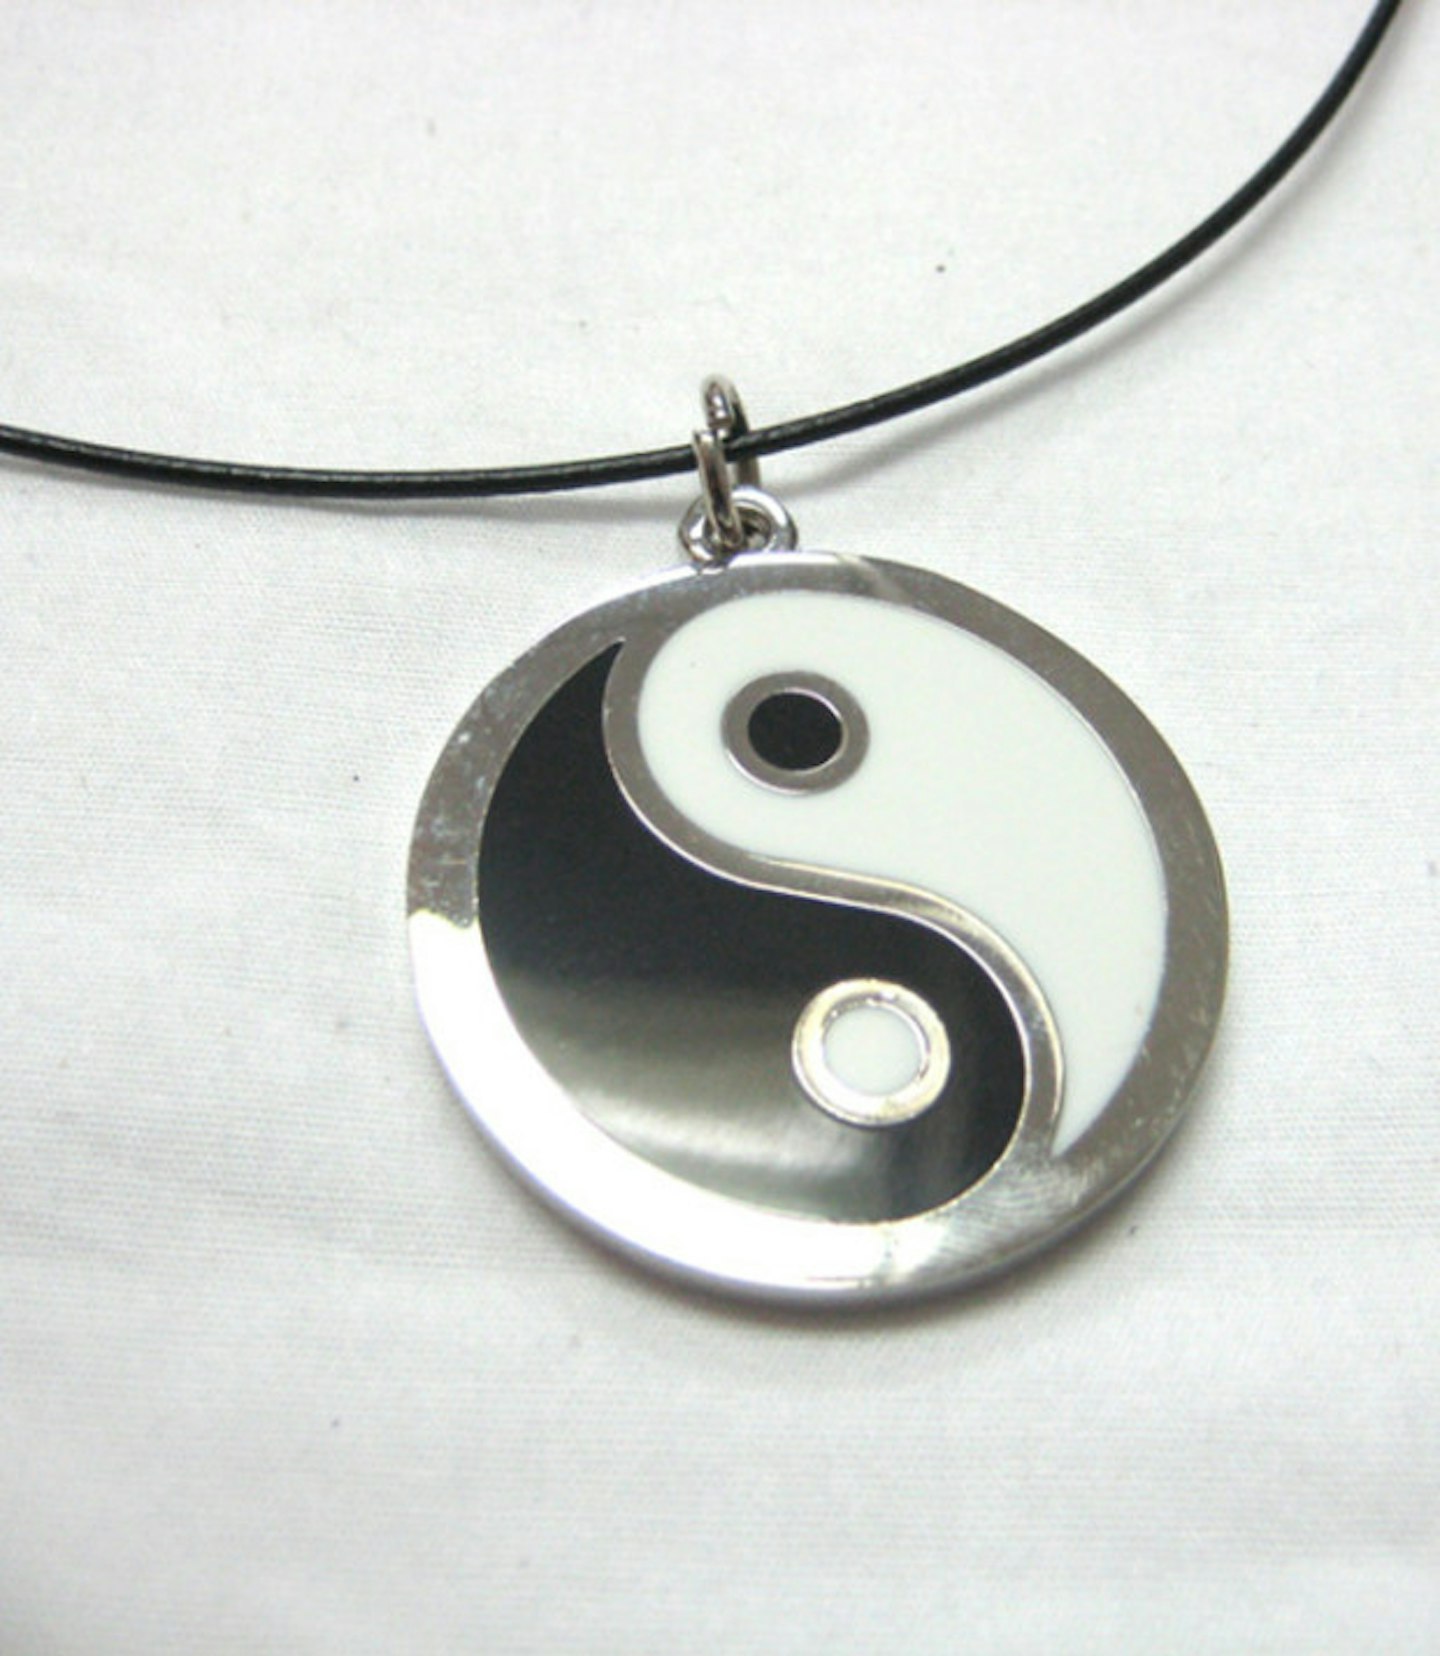 Anything with a Yin and Yang